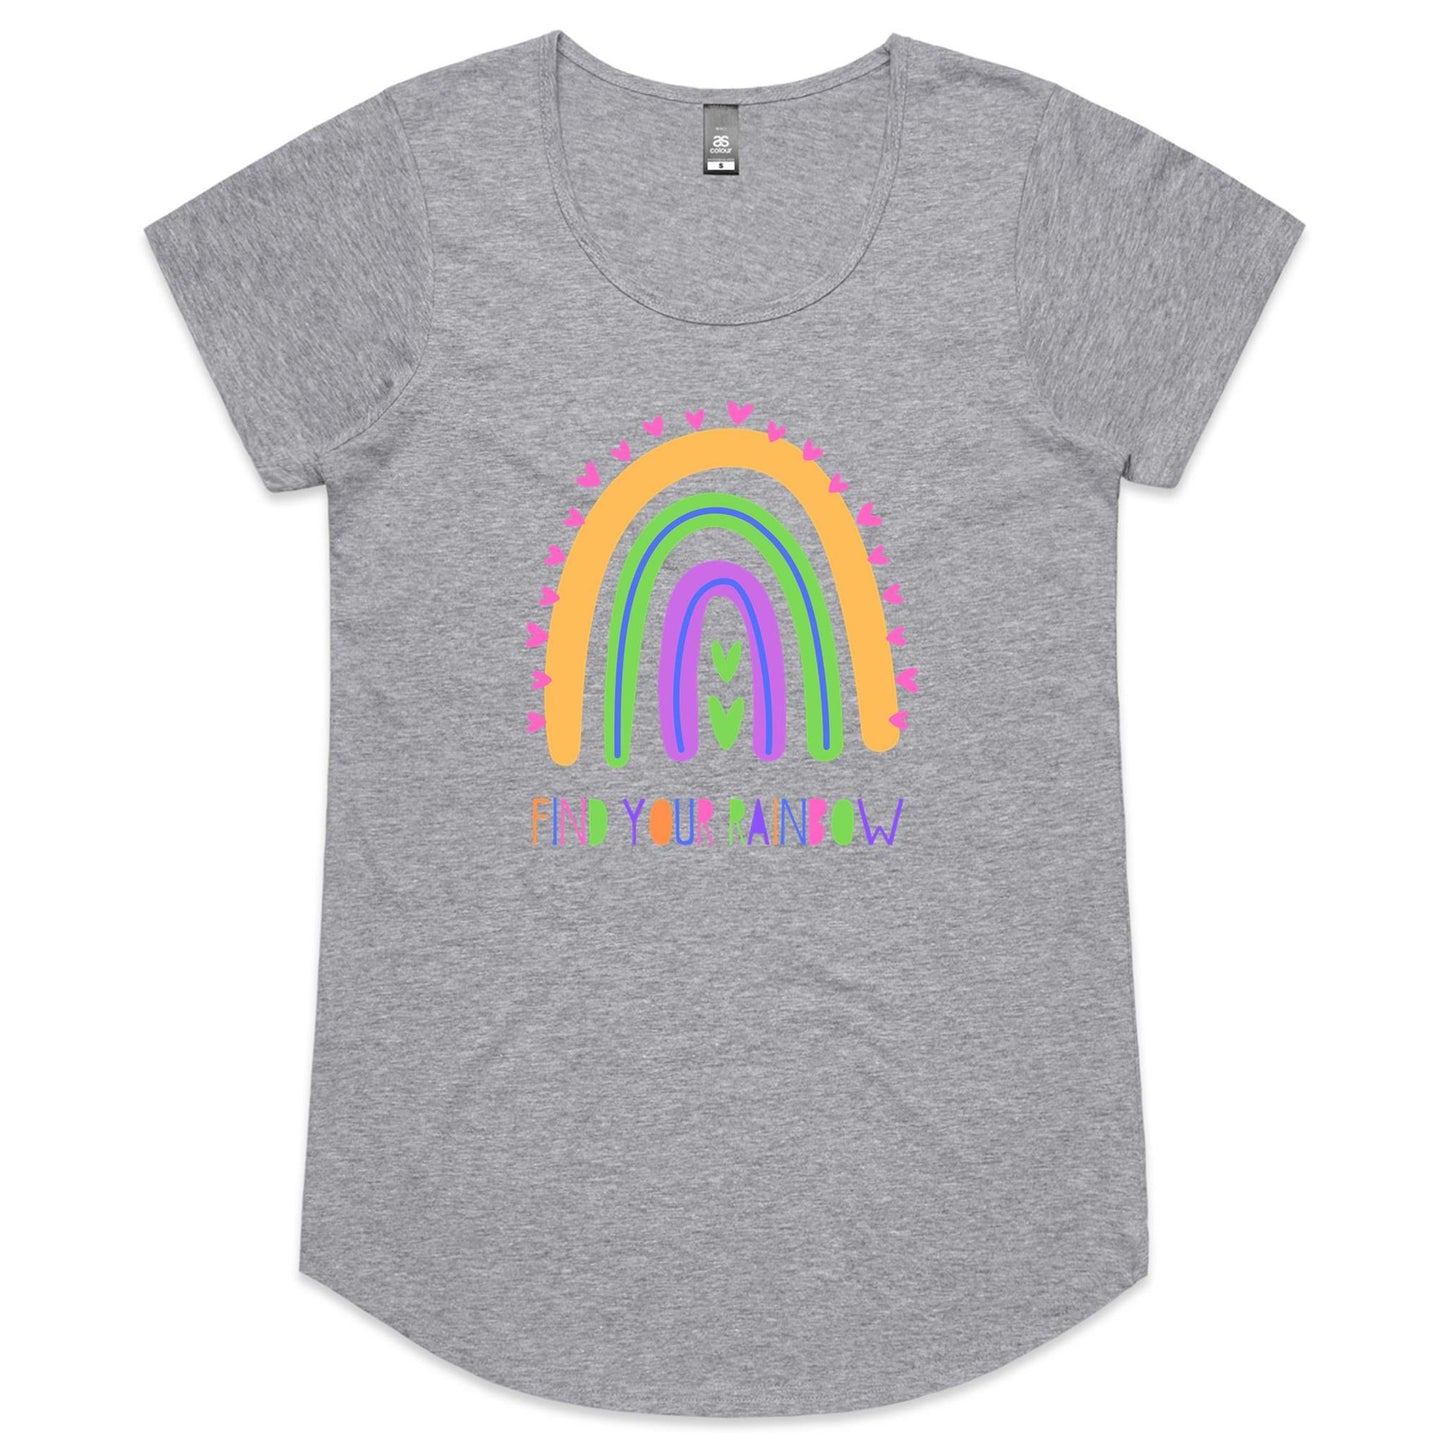 Find Your Rainbow - Womens Scoop Neck T-Shirt Grey Marle Womens Scoop Neck T-shirt Womens